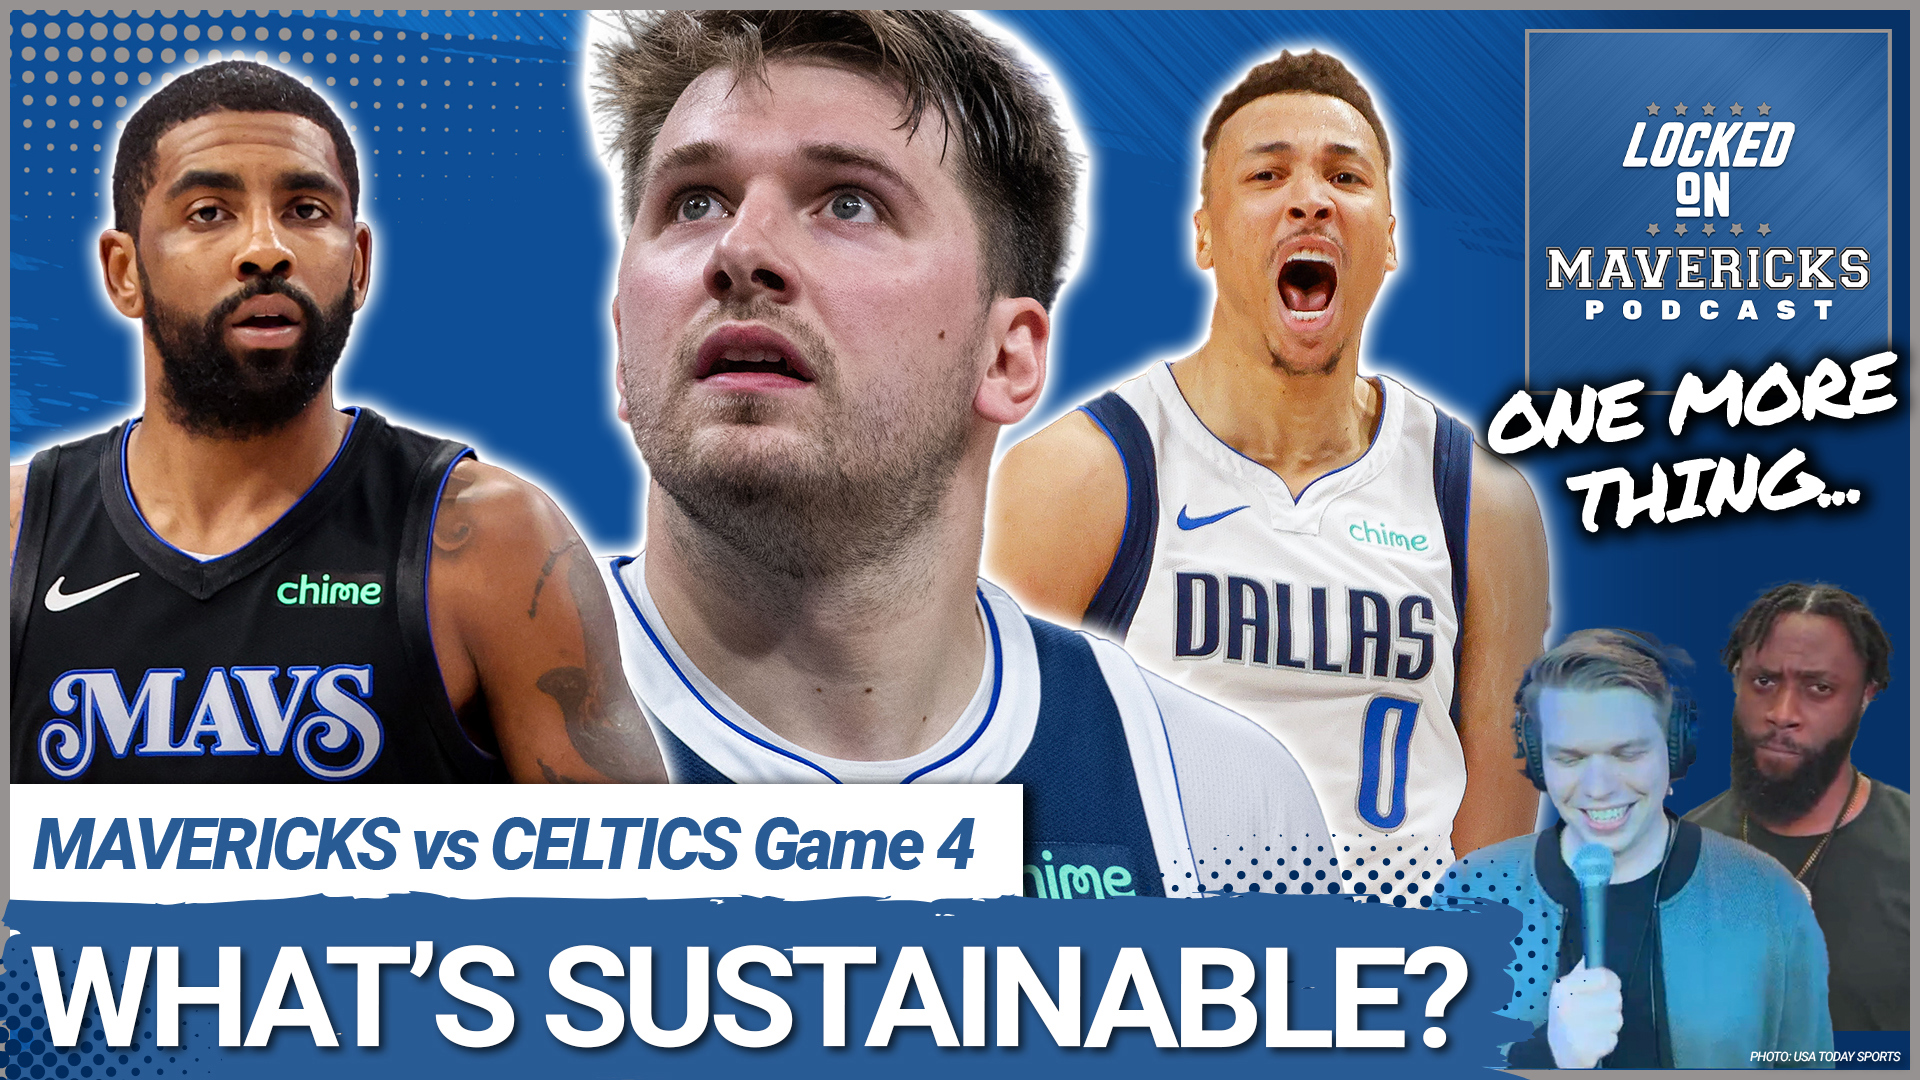 Nick Angstadt & Reggie Adetula share one more thing about the Mavs win over the Boston Celtics in Game 4 and what is sustainable for Game 5 and beyond.